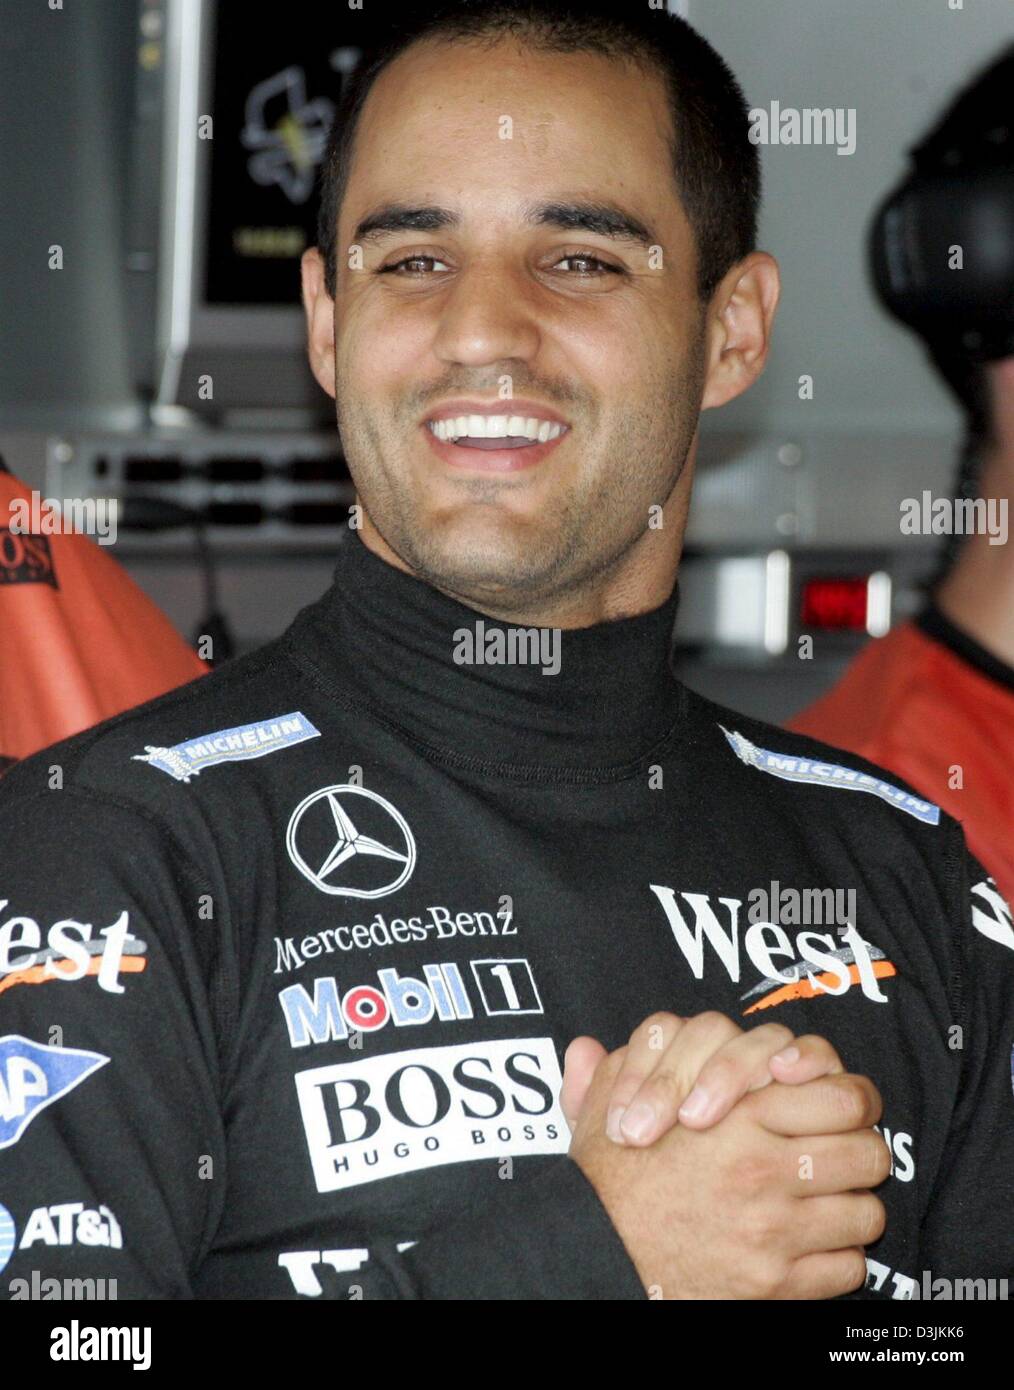 (dpa) - Colombian Formula One driver Juan Pablo Montoya of McLaren Mercedes laughs in his pit during a practice session at the Malaysian Grand Prix circuit in Sepang, near Kuala Lumpur, Malaysia, Friday 18 March 2005. Montoya clocked the second fastest time. The Grand Prix of Malaysia takes place on Sunday 20 March 2005. Stock Photo